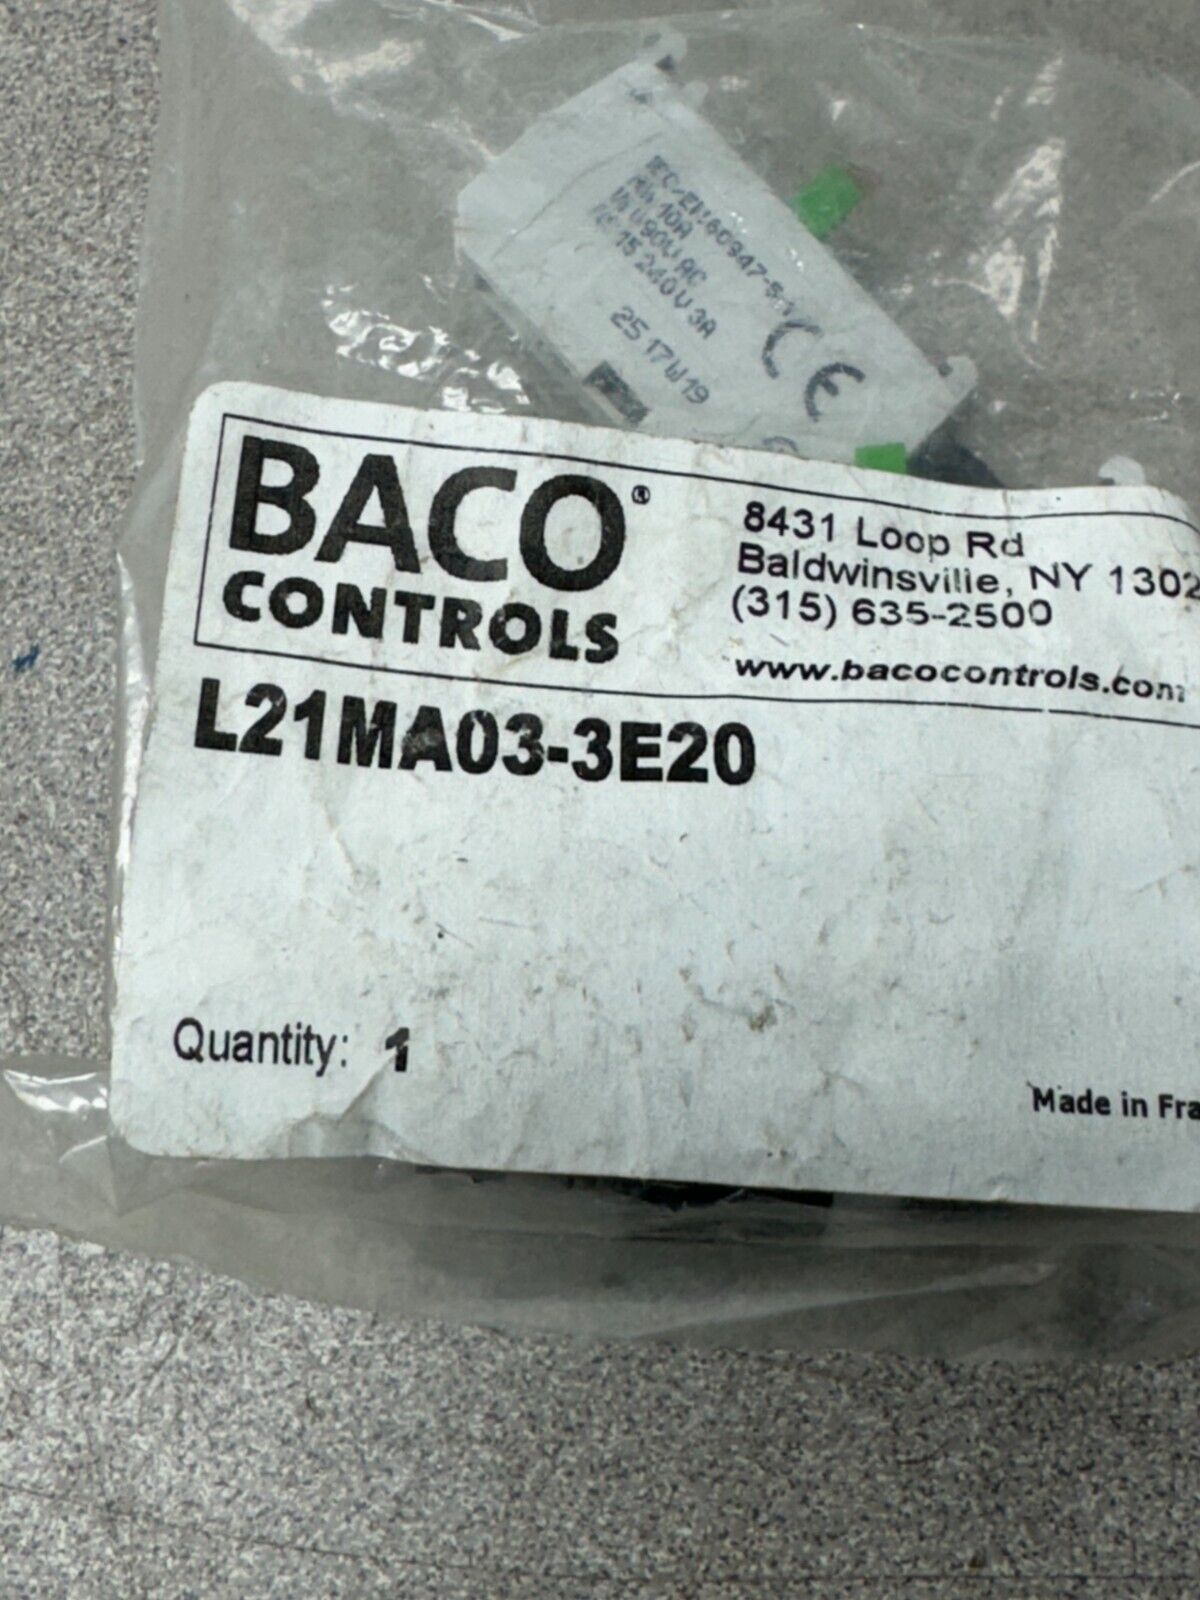 NEW IN PACKAGE BACO CONTROLS SELECTOR SWITCH L21MA03-3E20